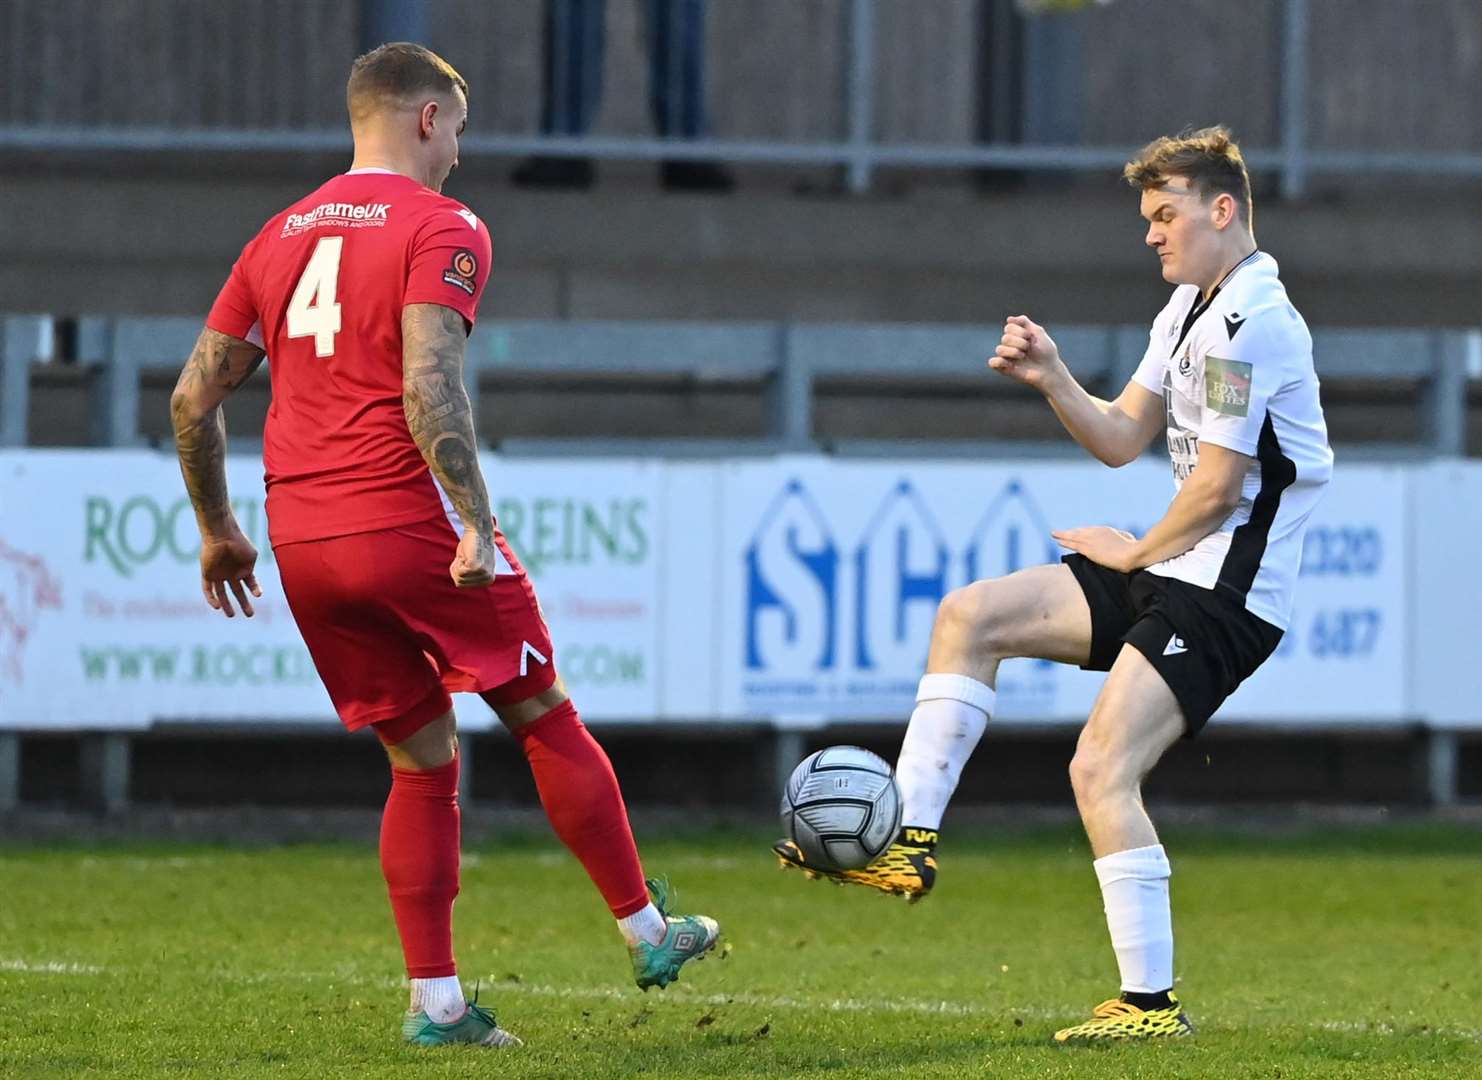 Dartford midfielder Cameron Brodie joins Margate to boost match fitness says manager Alan Dowson